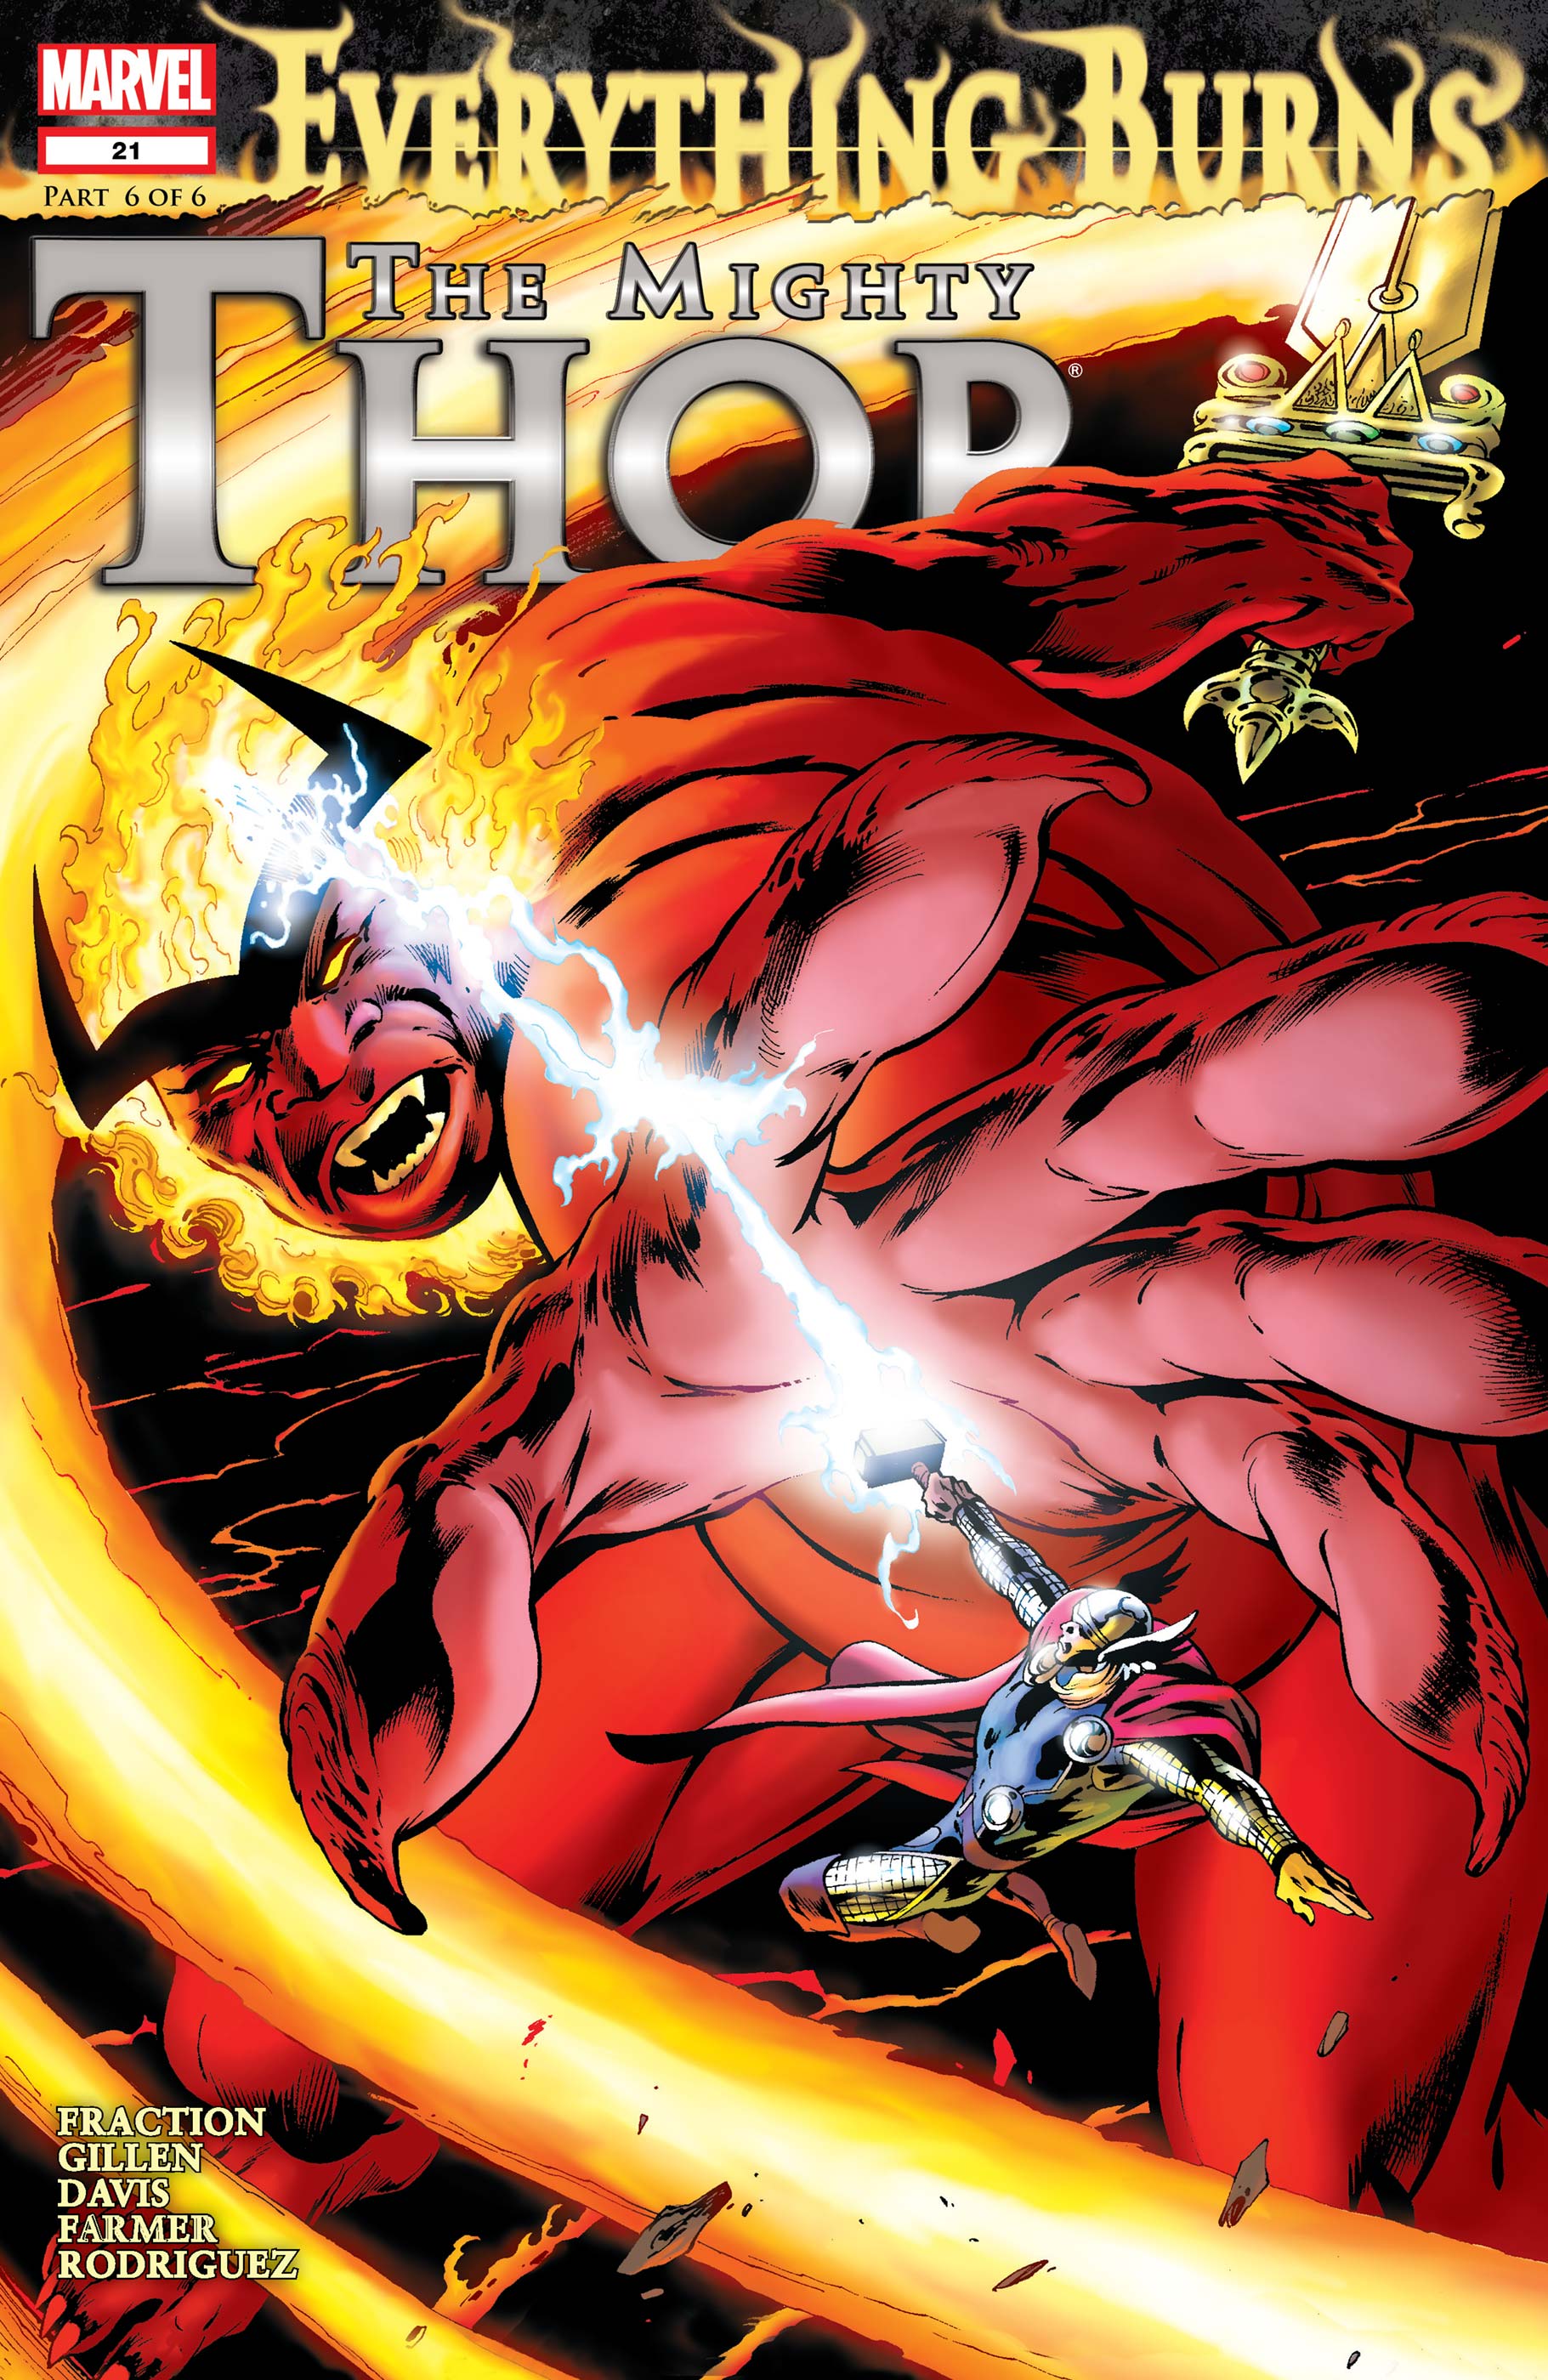 The Mighty Thor Multiple Listings: Select Your Issue - Marvel 2011-2012